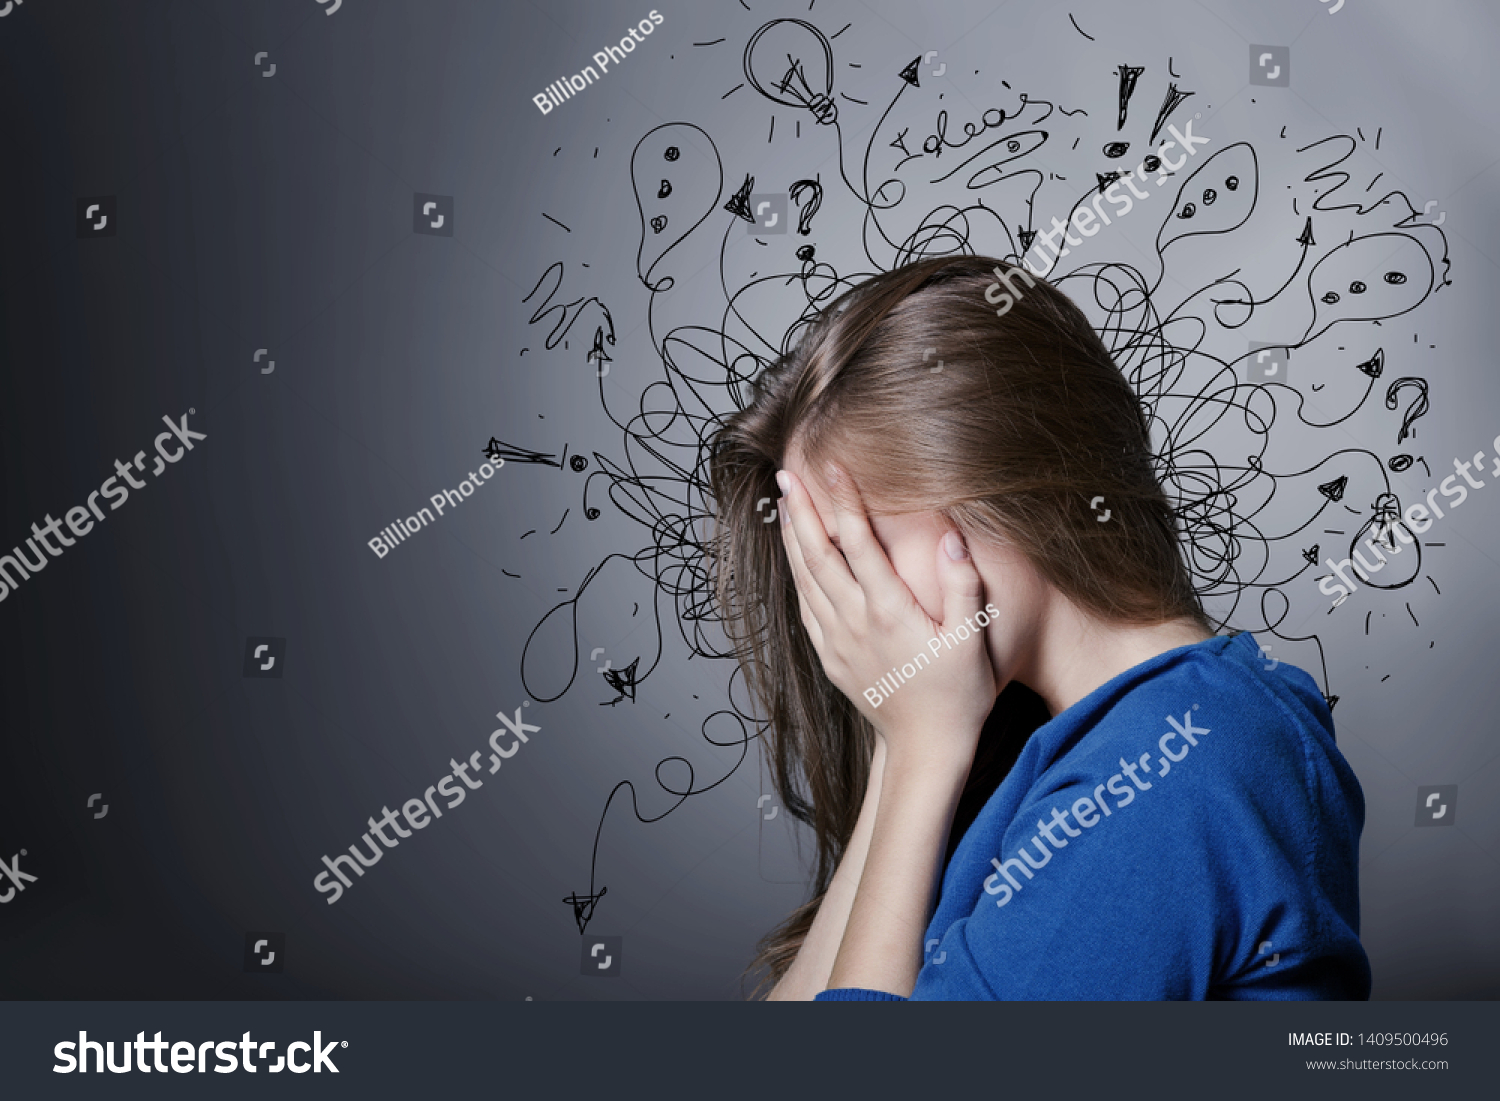 Sad young man with worried stressed face expression and brain melting into lines question marks. Obsessive compulsive, adhd, anxiety disorders concept #1409500496